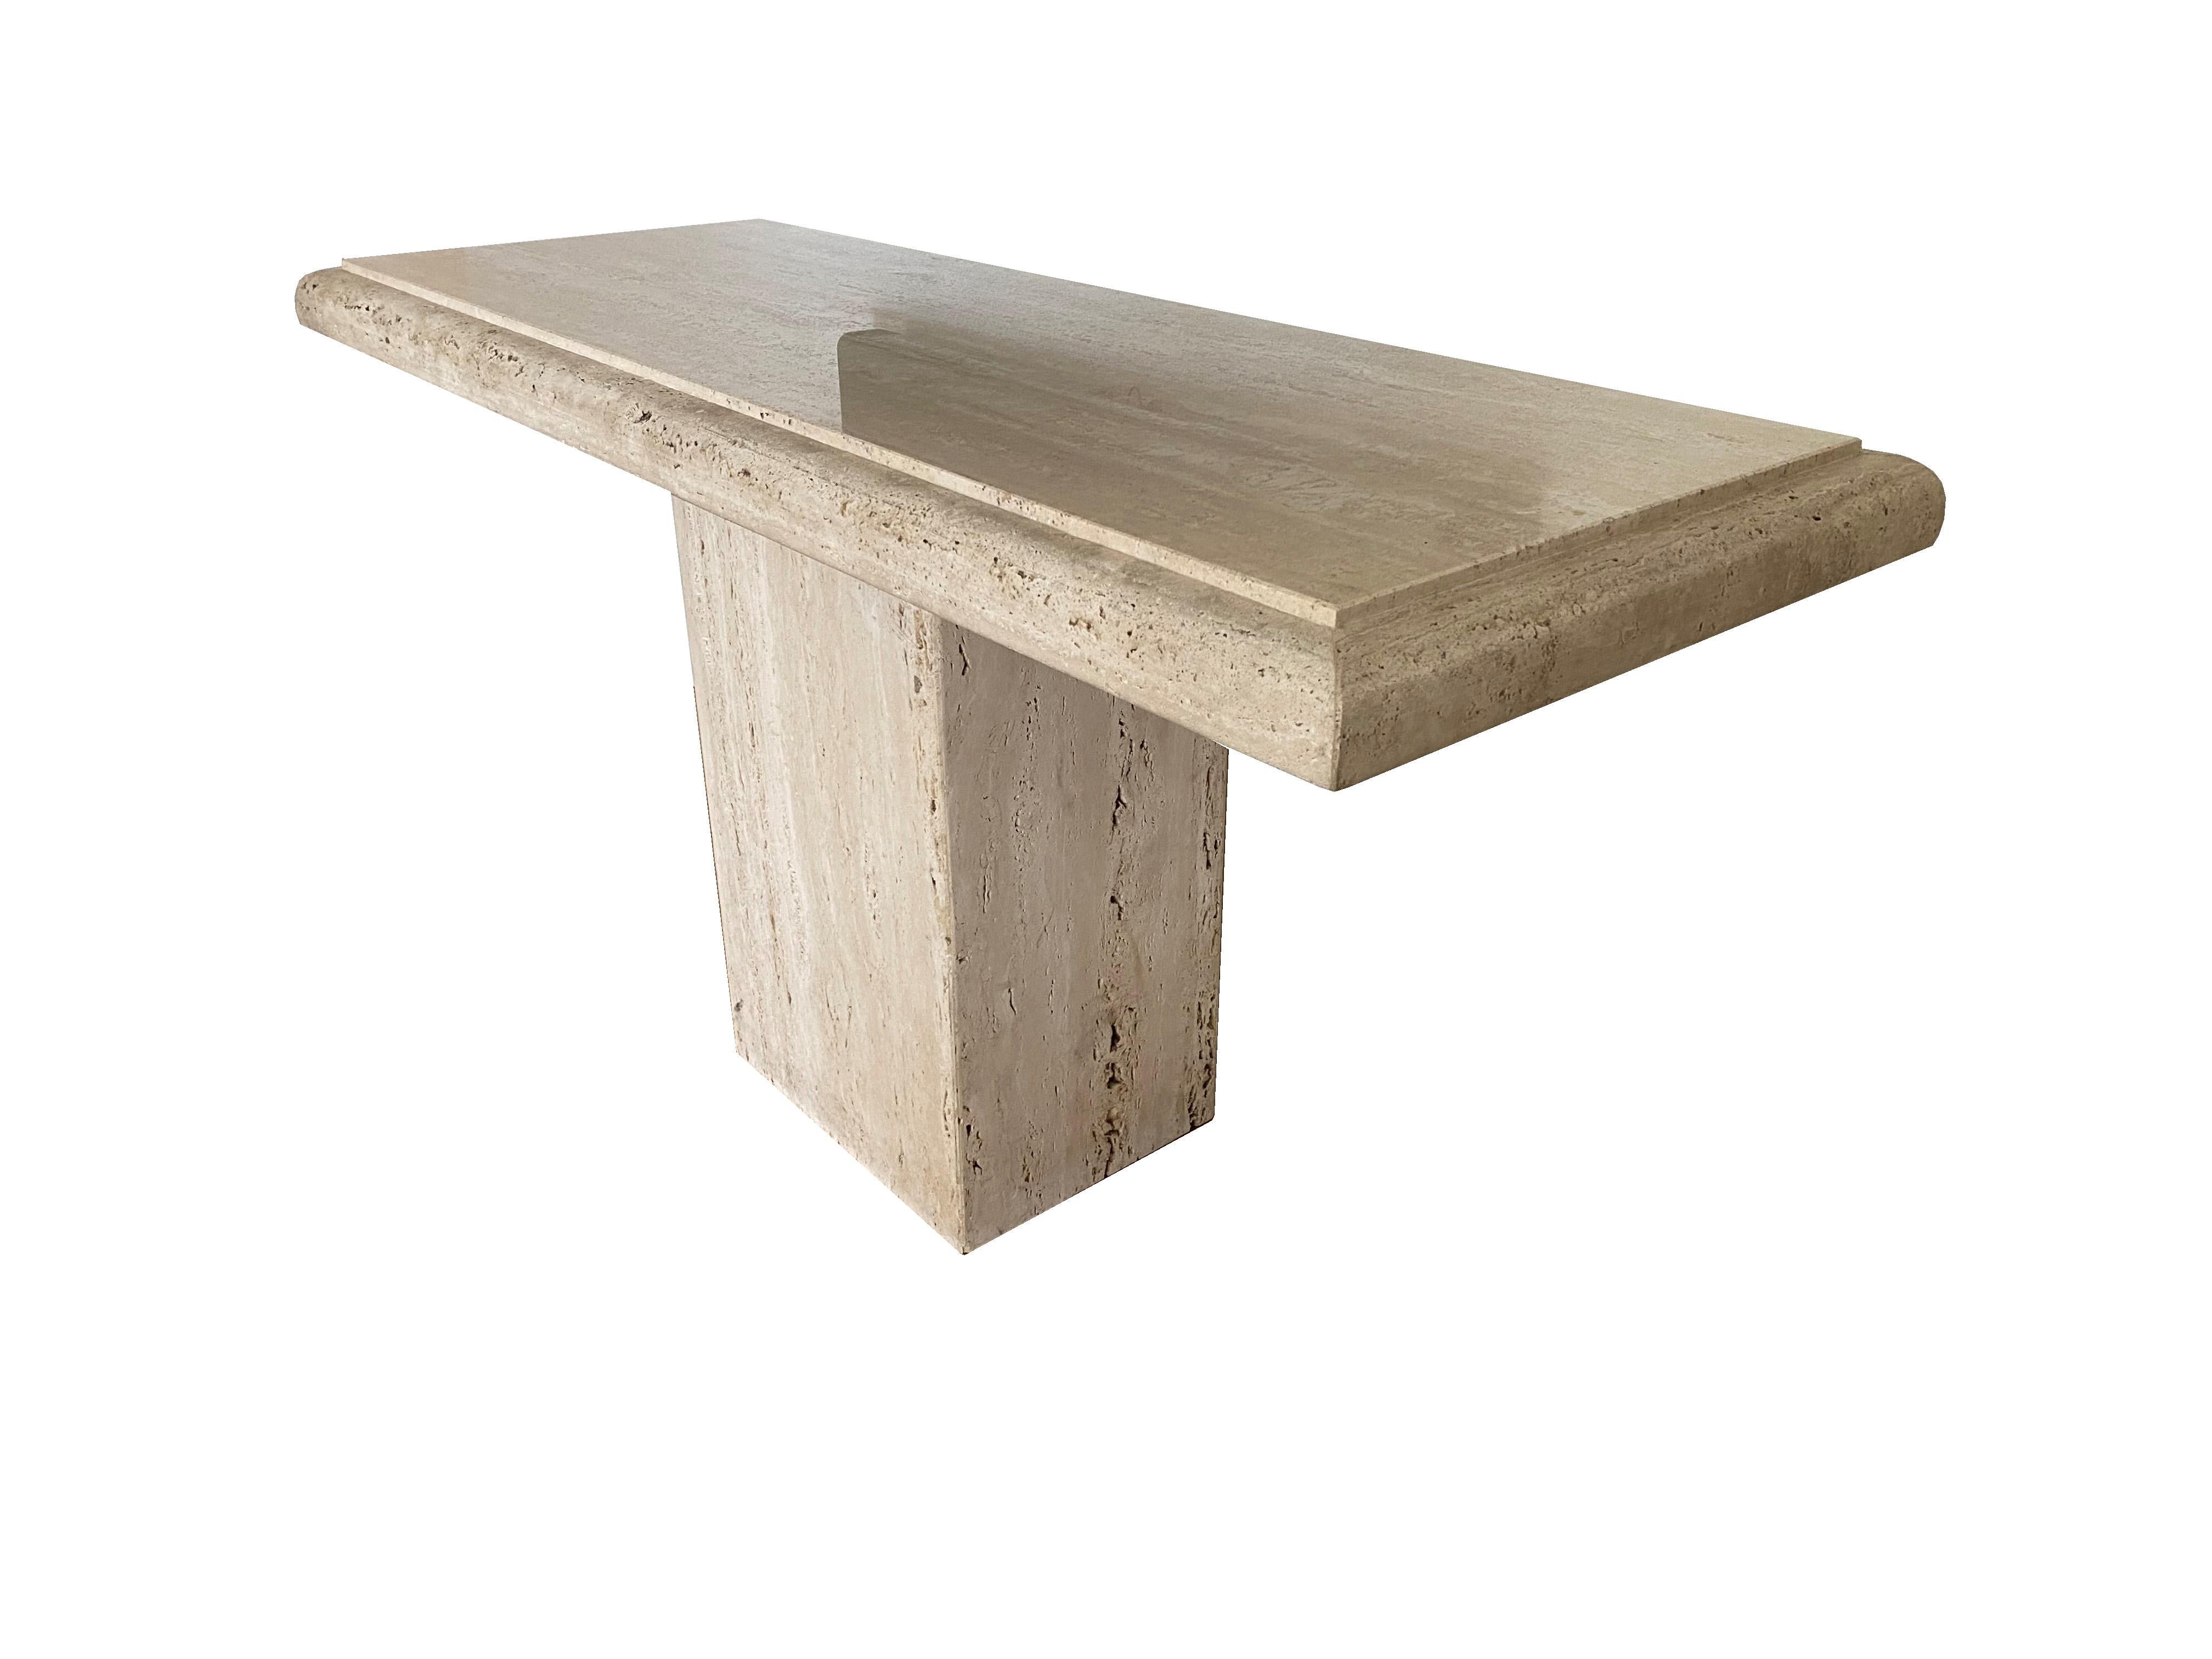 Travertine Console table. Hand made in Italy. A classic statement piece in any setting.